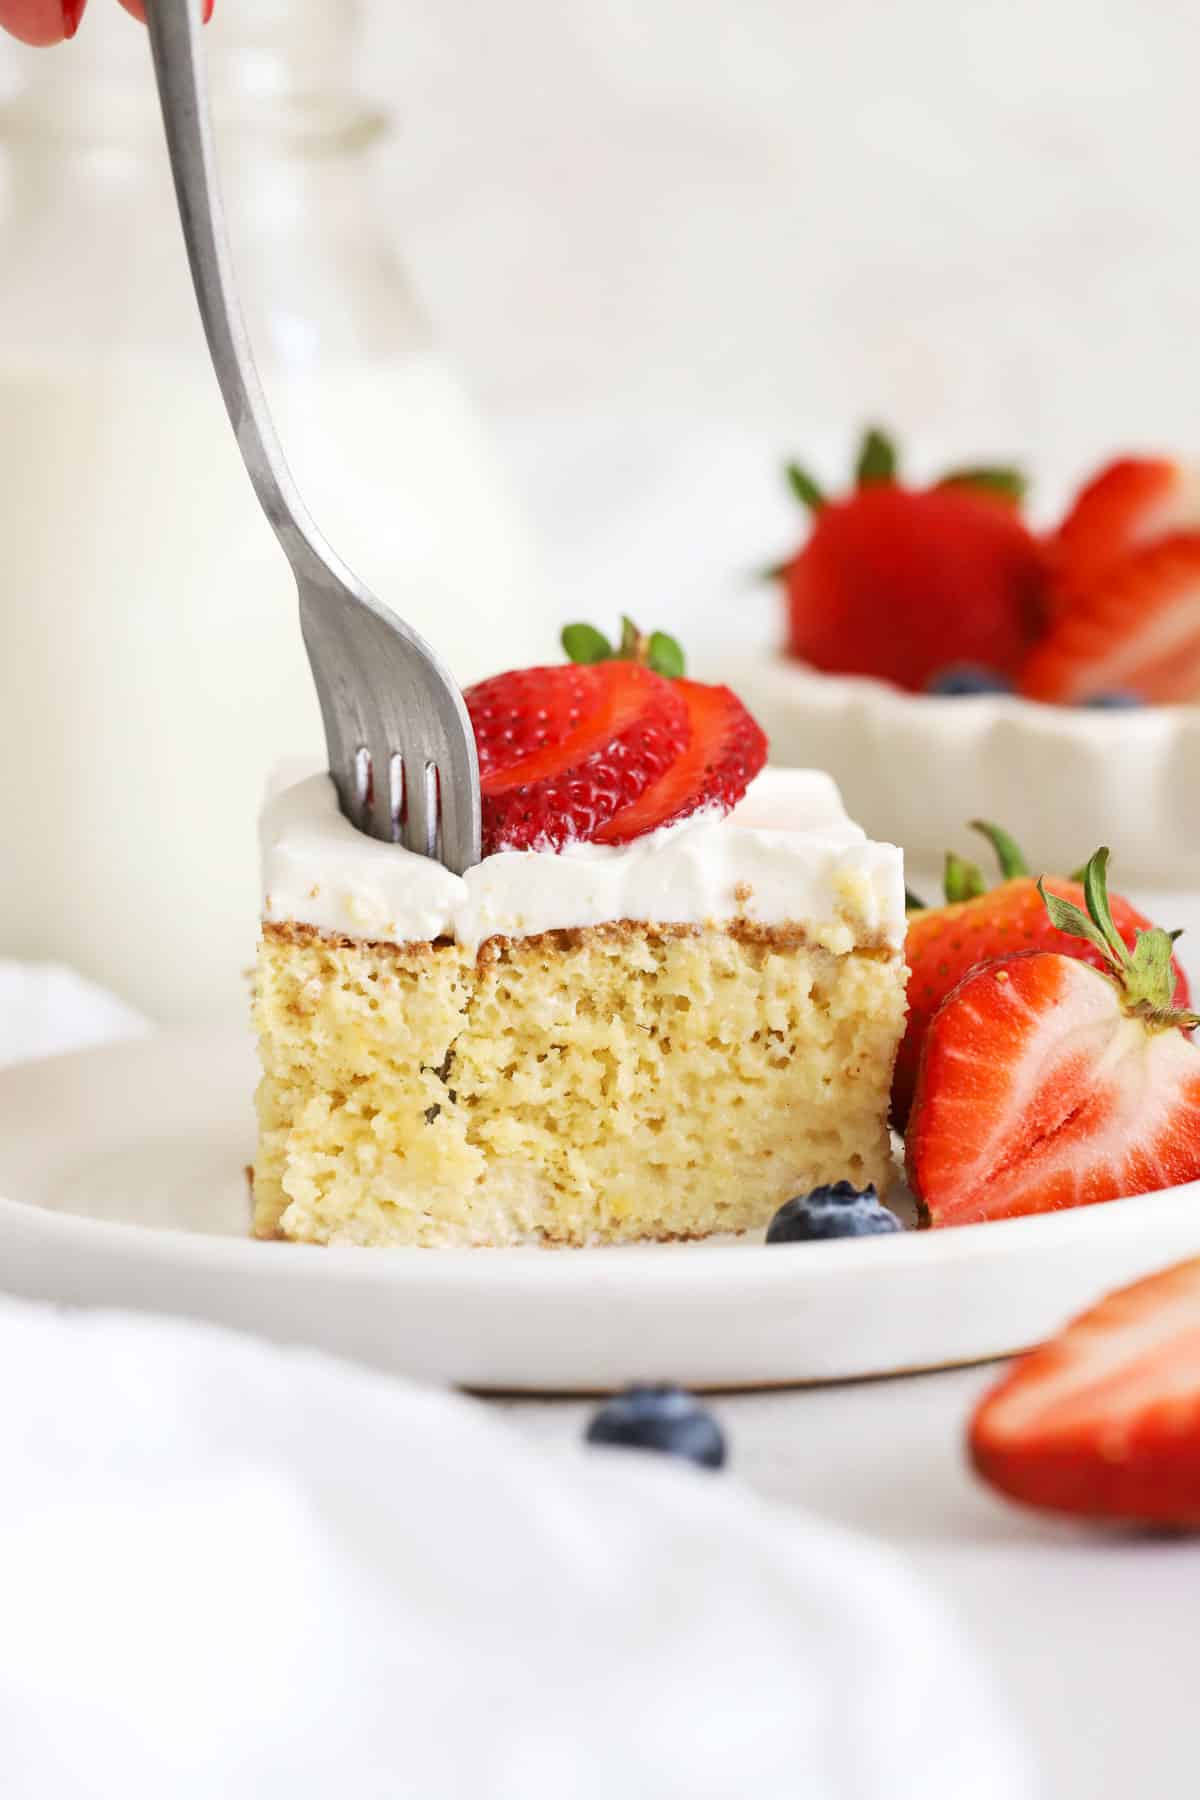 A fork getting a bite out of a slice of gluten-free tres leches cake